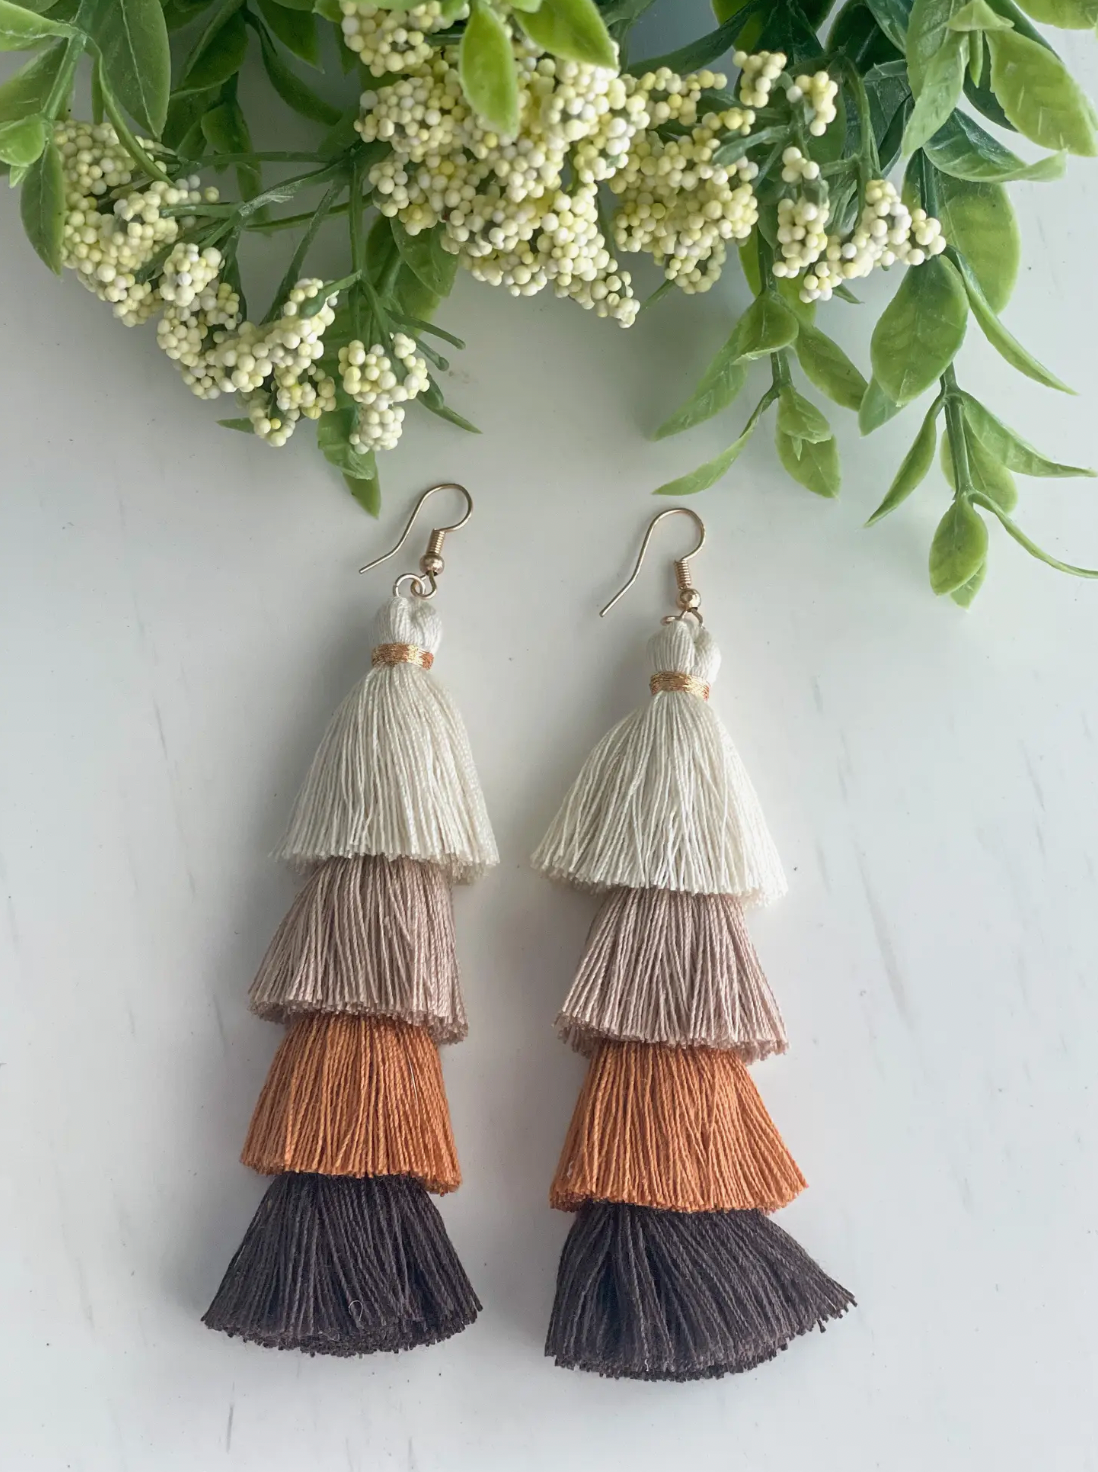 How To Make Tassels And Fringe For Jewelry And Decor | Made In A Day